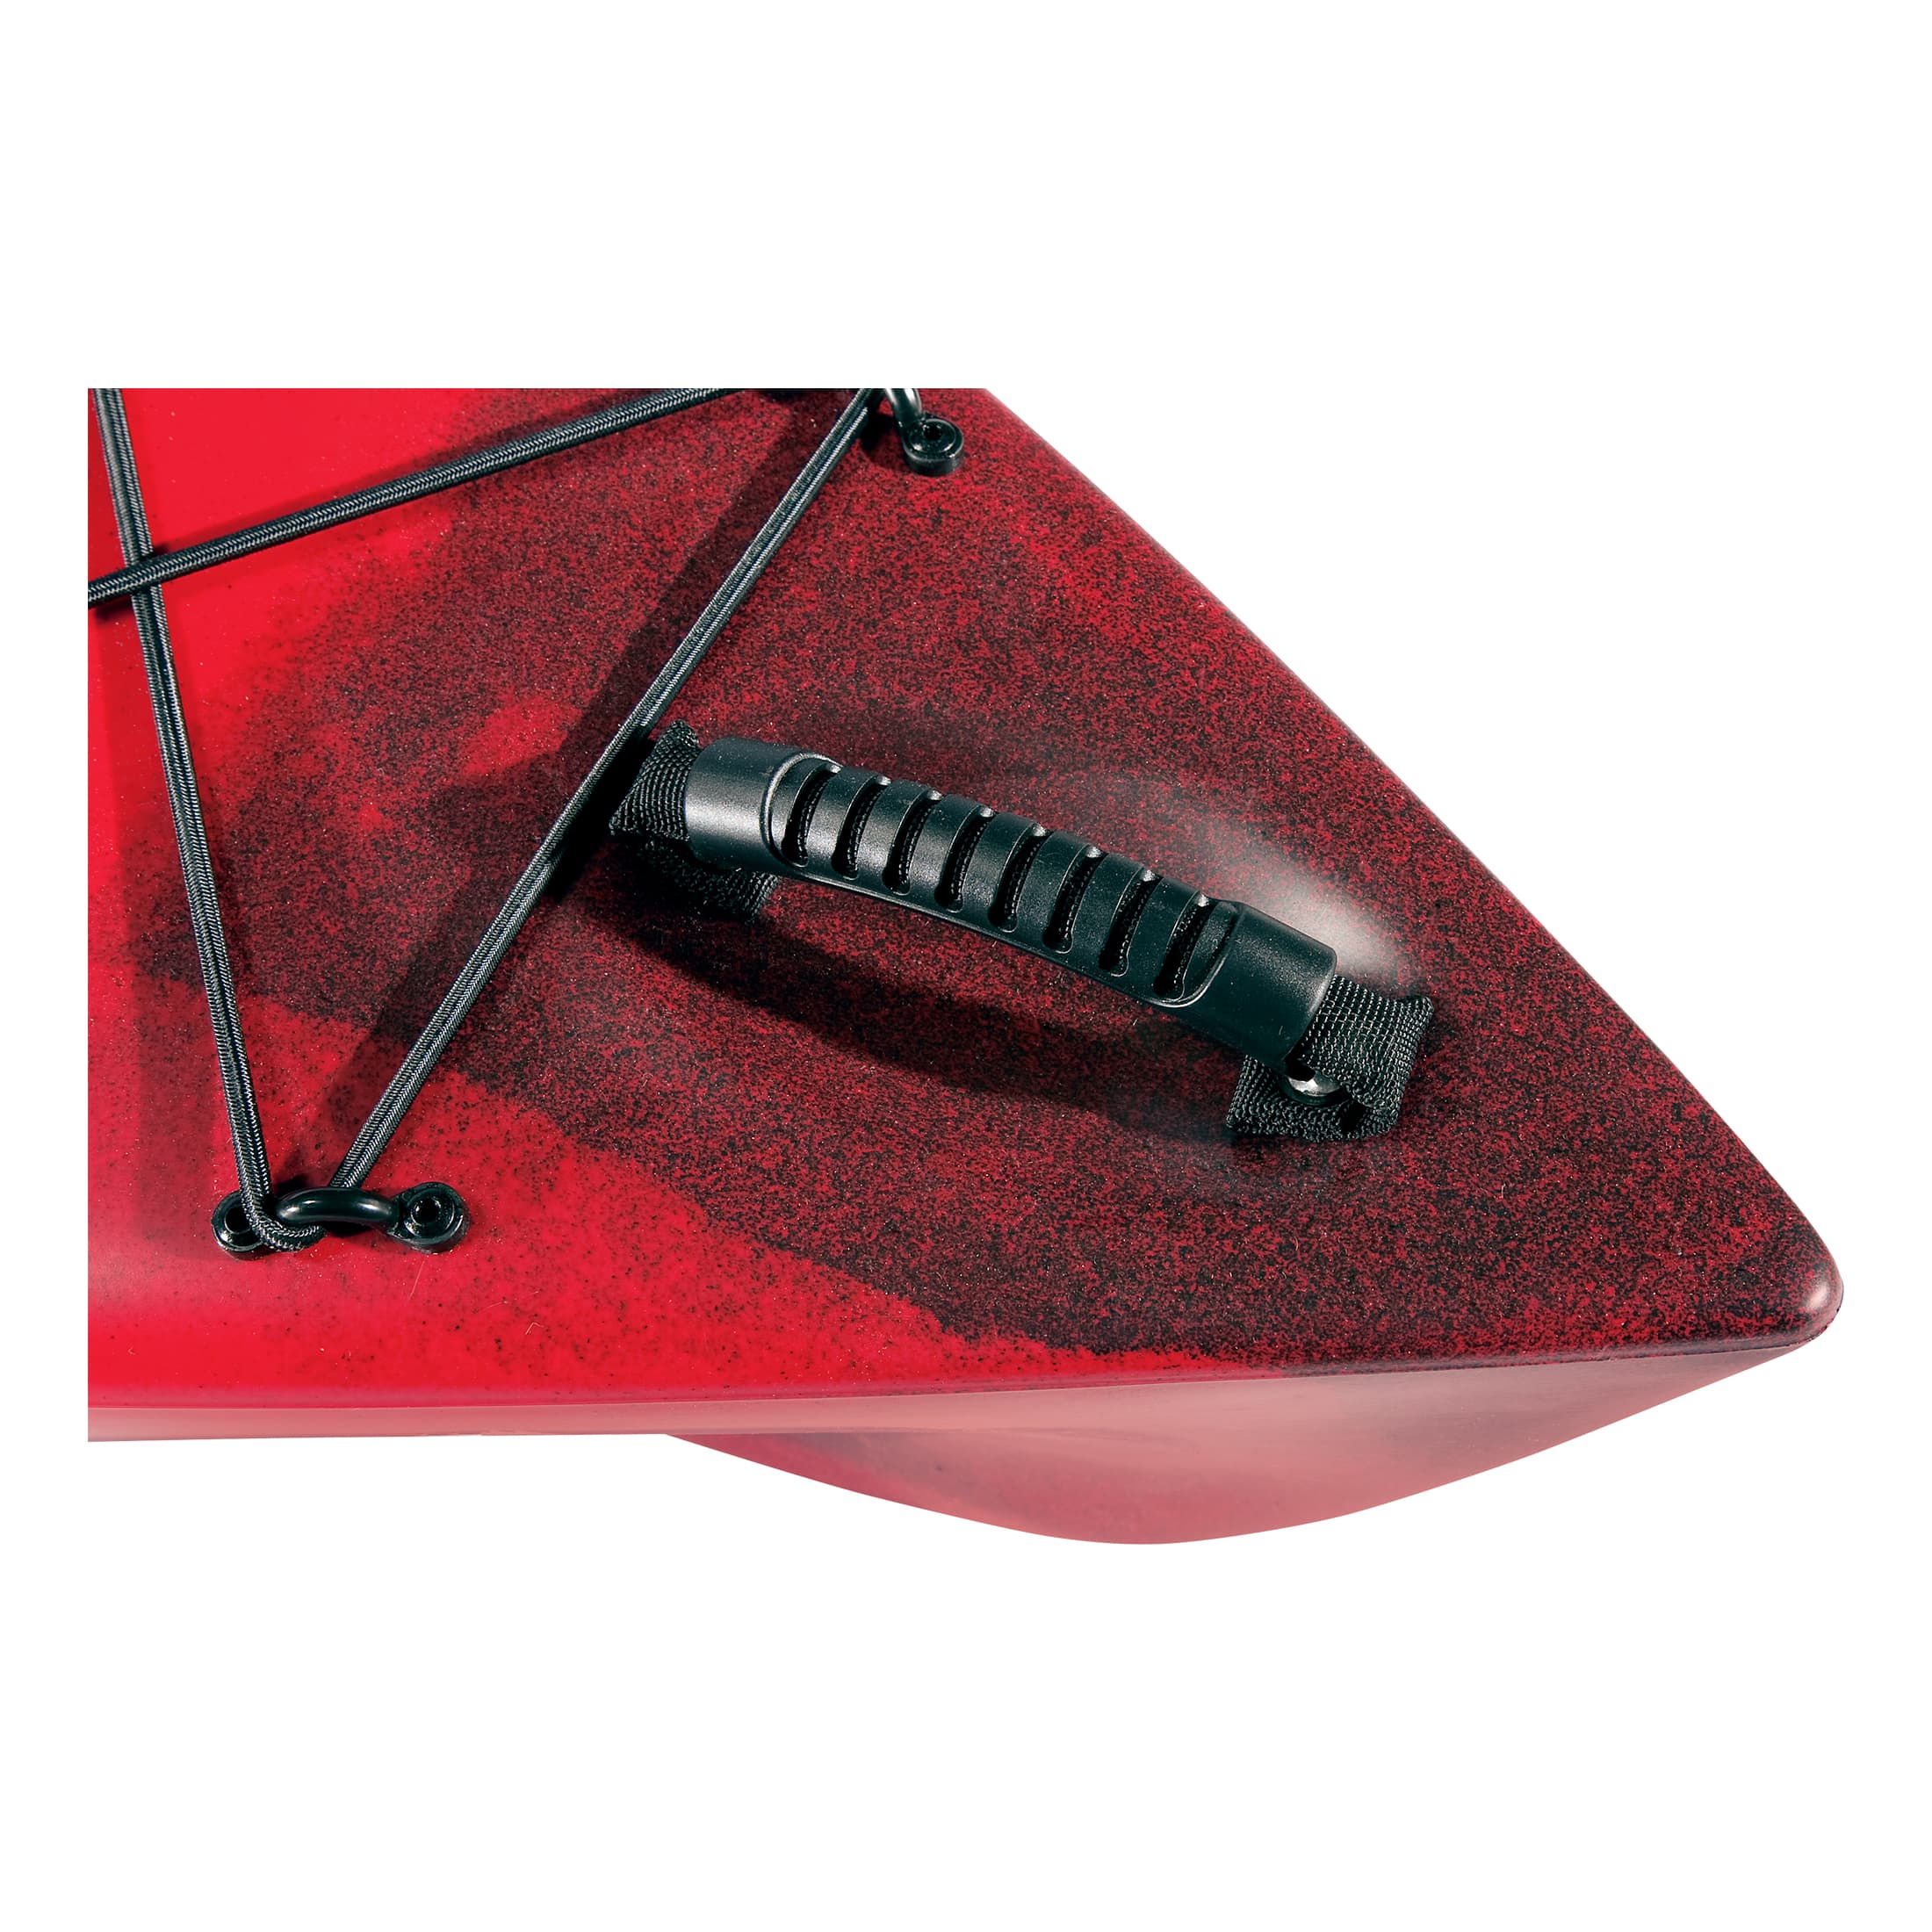 ASCEND® D10 Sit-In Kayak - Red/Black - Carry Handle